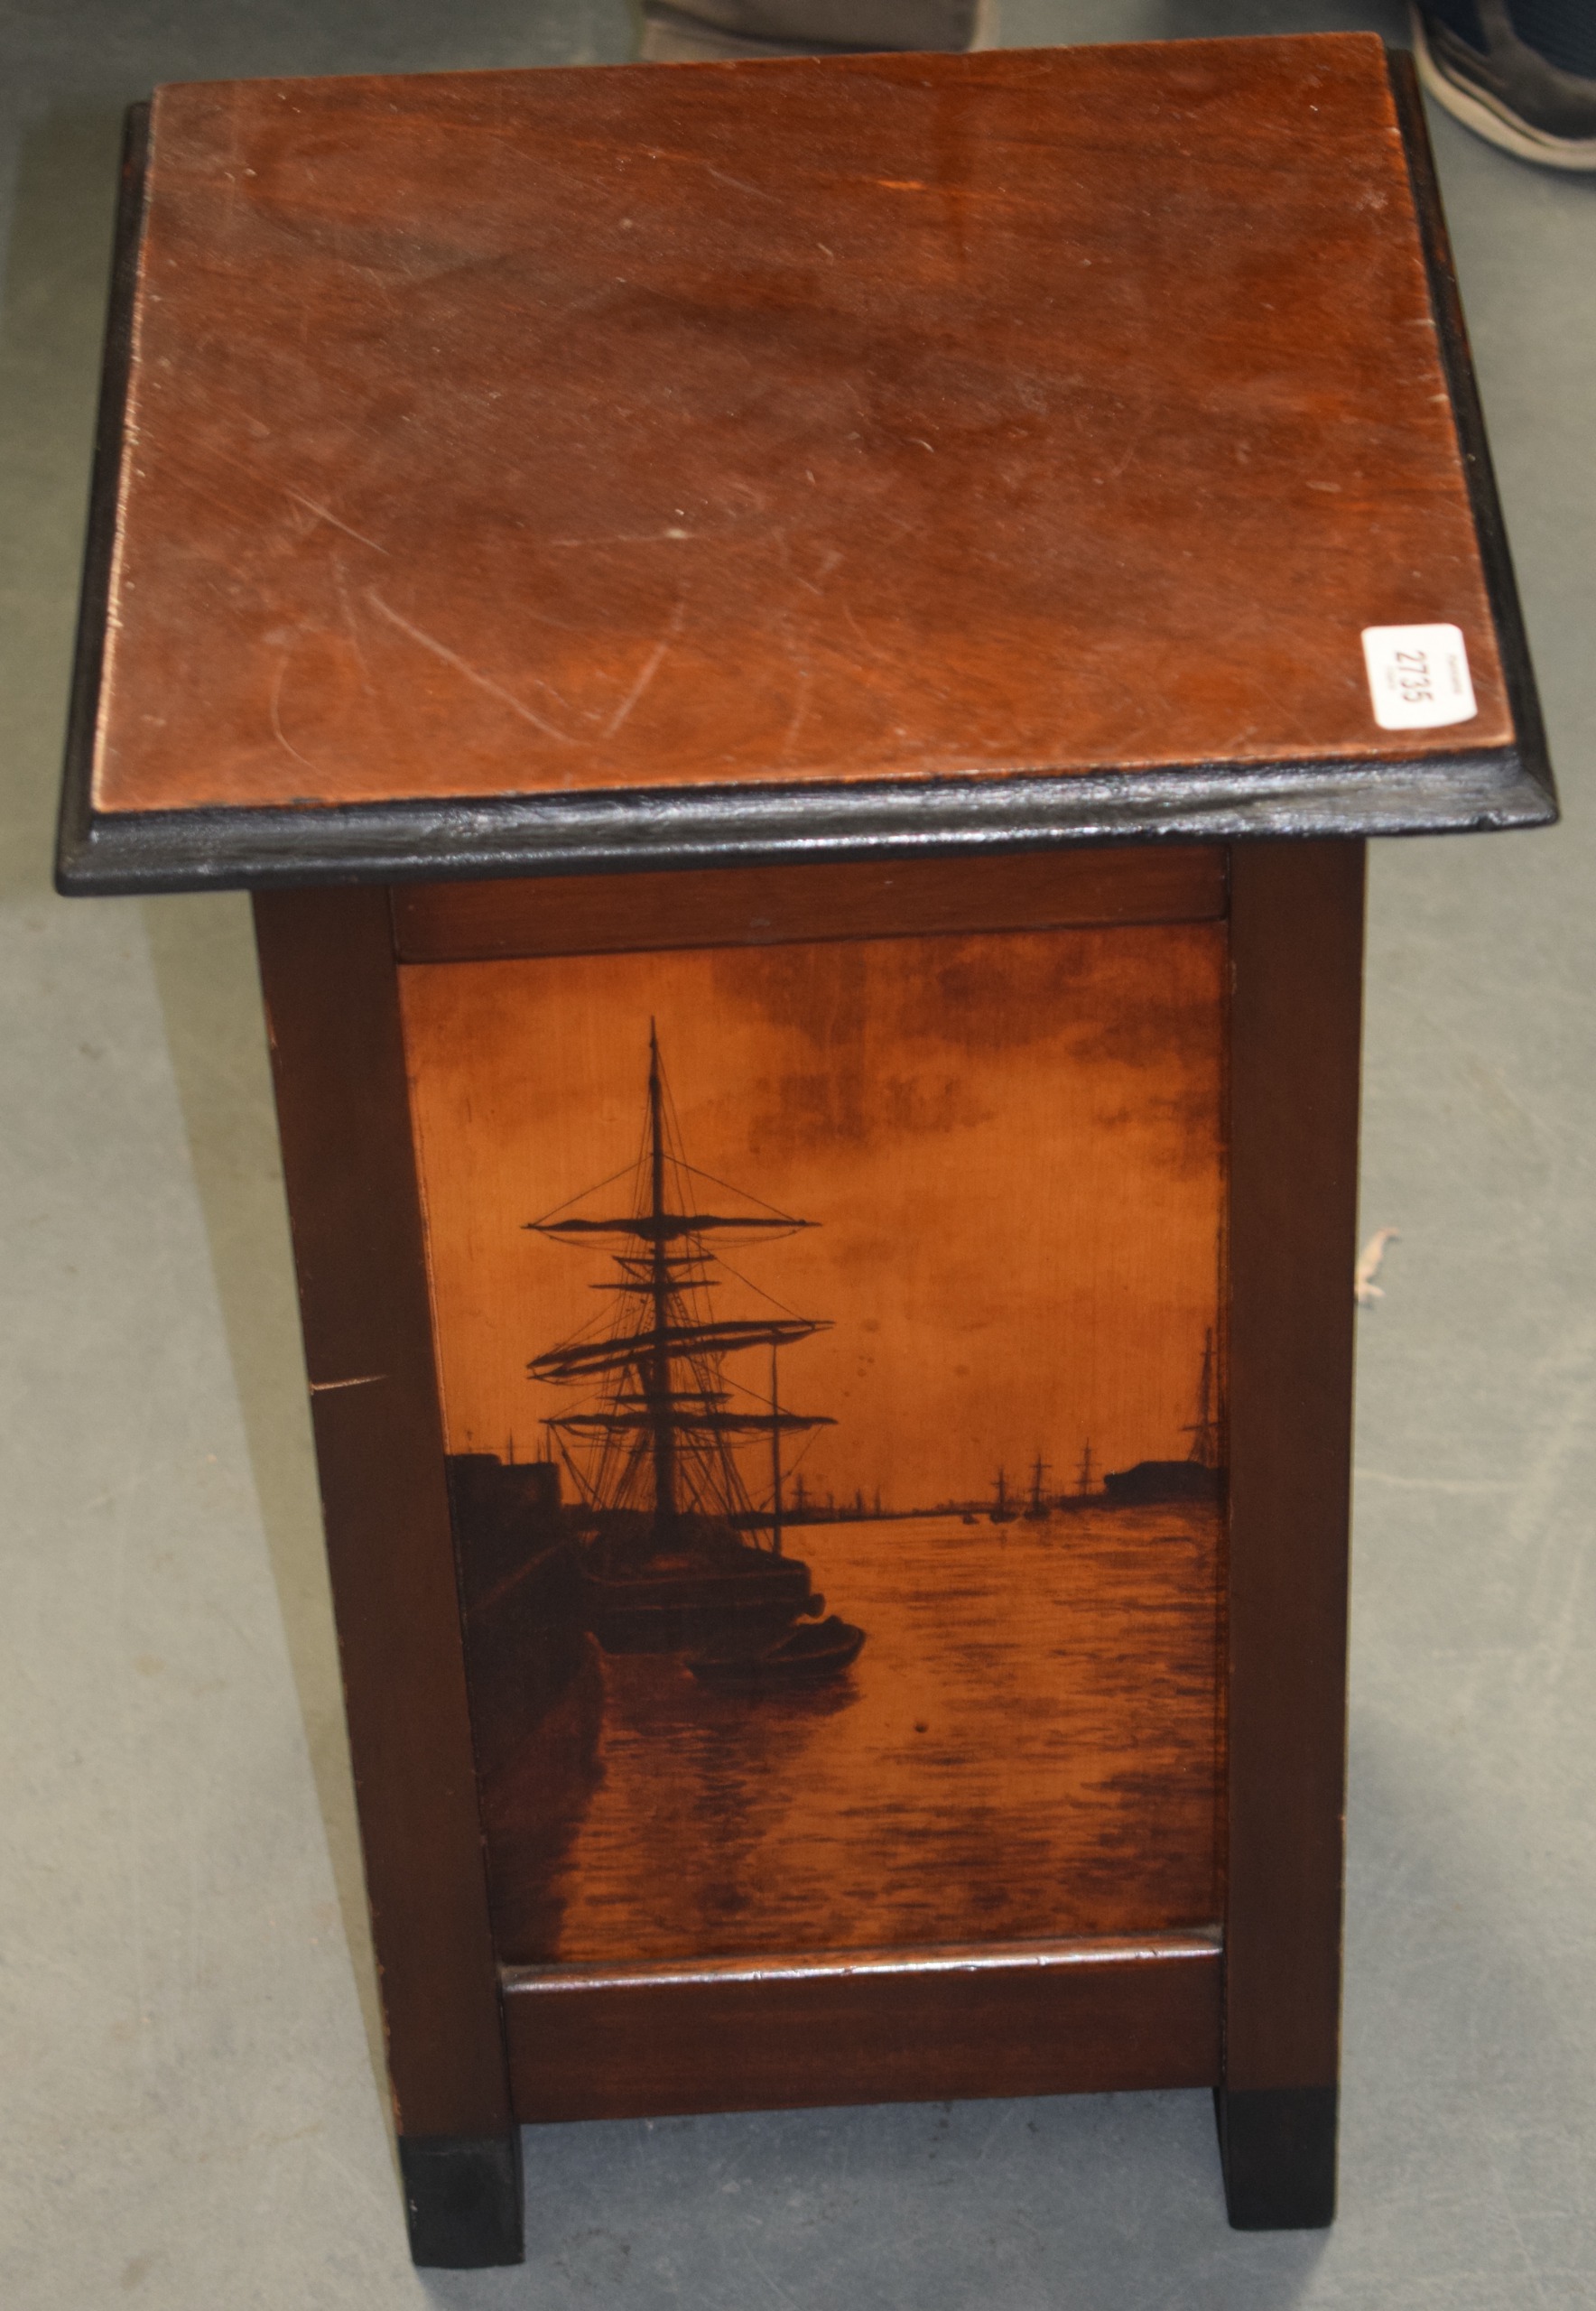 AN ANTIQUE PEN WORK BOX decorated with boats and landscapes. 33 cm x 50 cm.